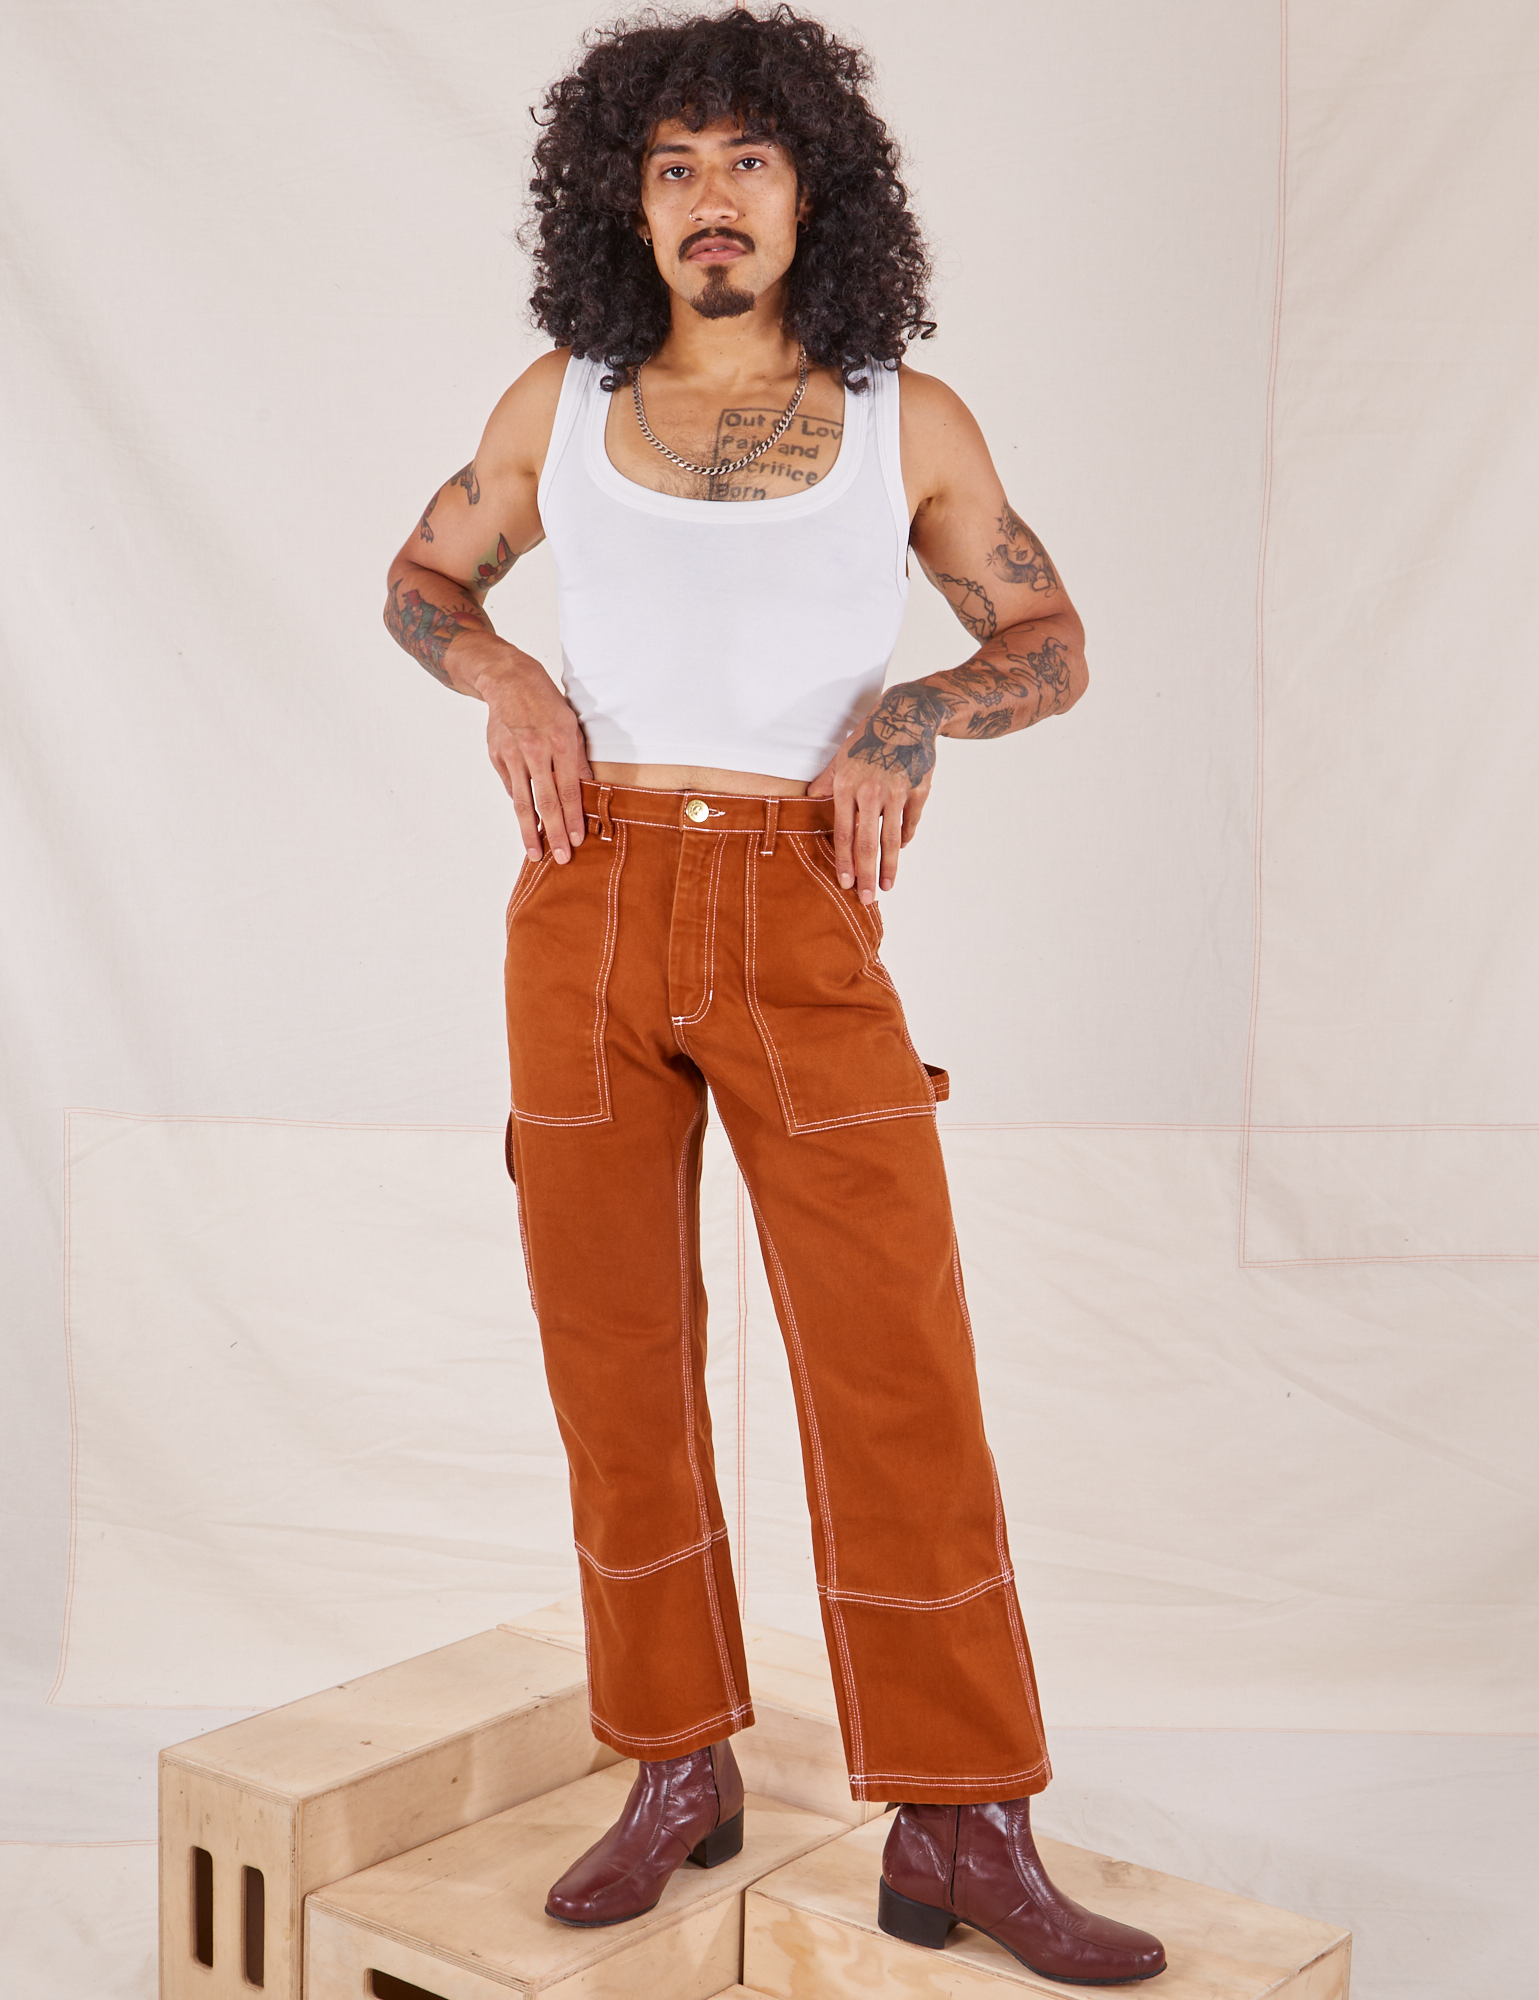 Jesse is 5&#39;8&quot; and wearing XS Carpenter Jeans in Burnt Terracotta paired with a vintage off-white Cropped Tank Top